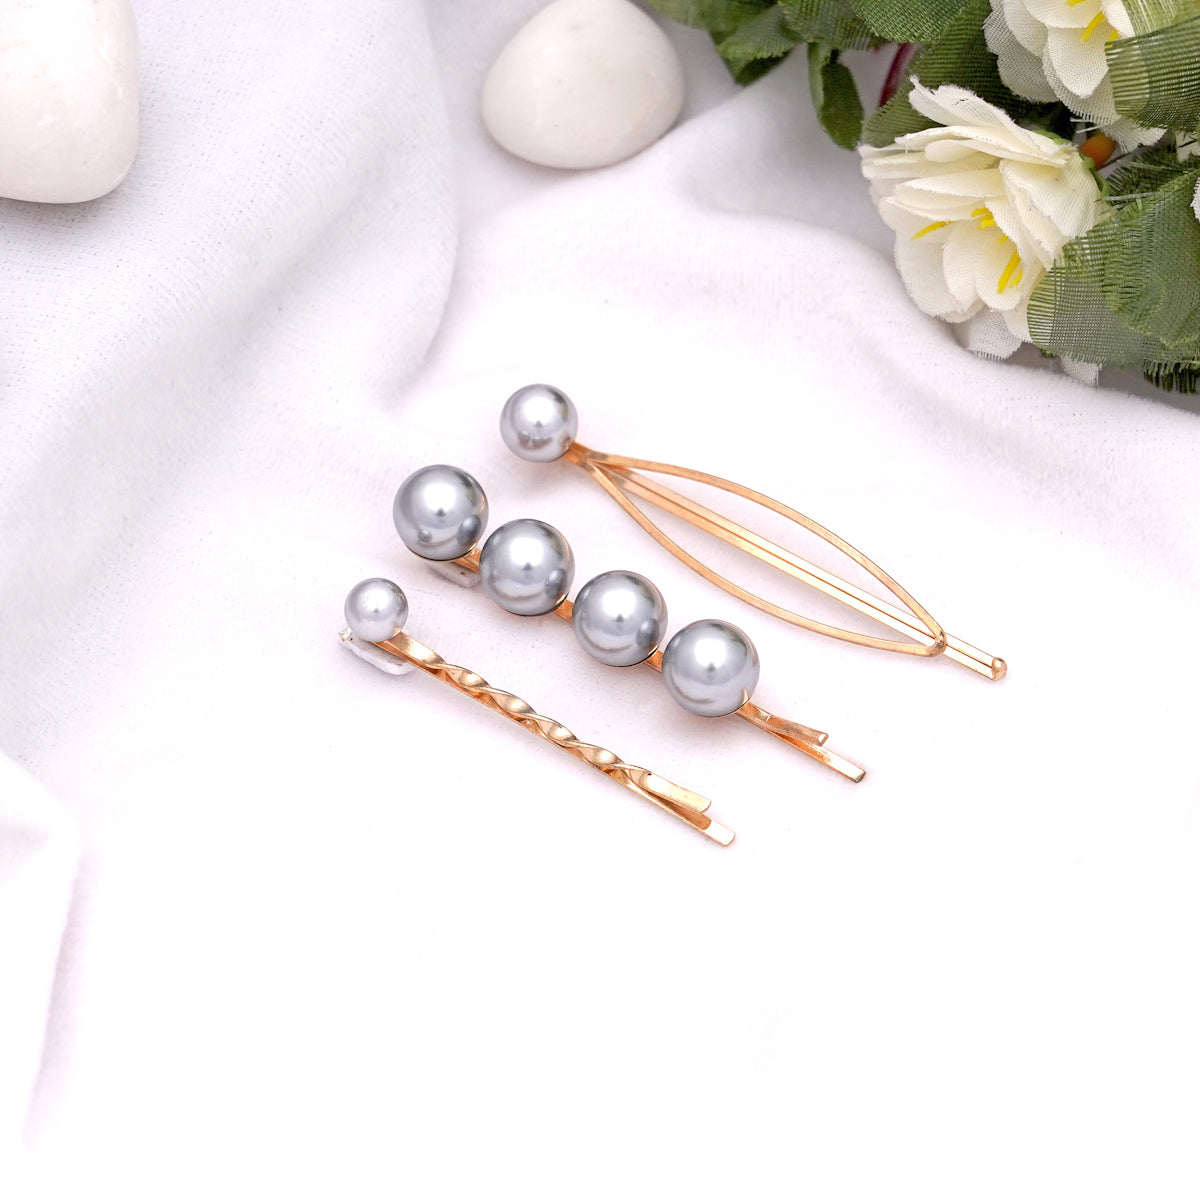 Grey Pearl Hairpins - Set of 3